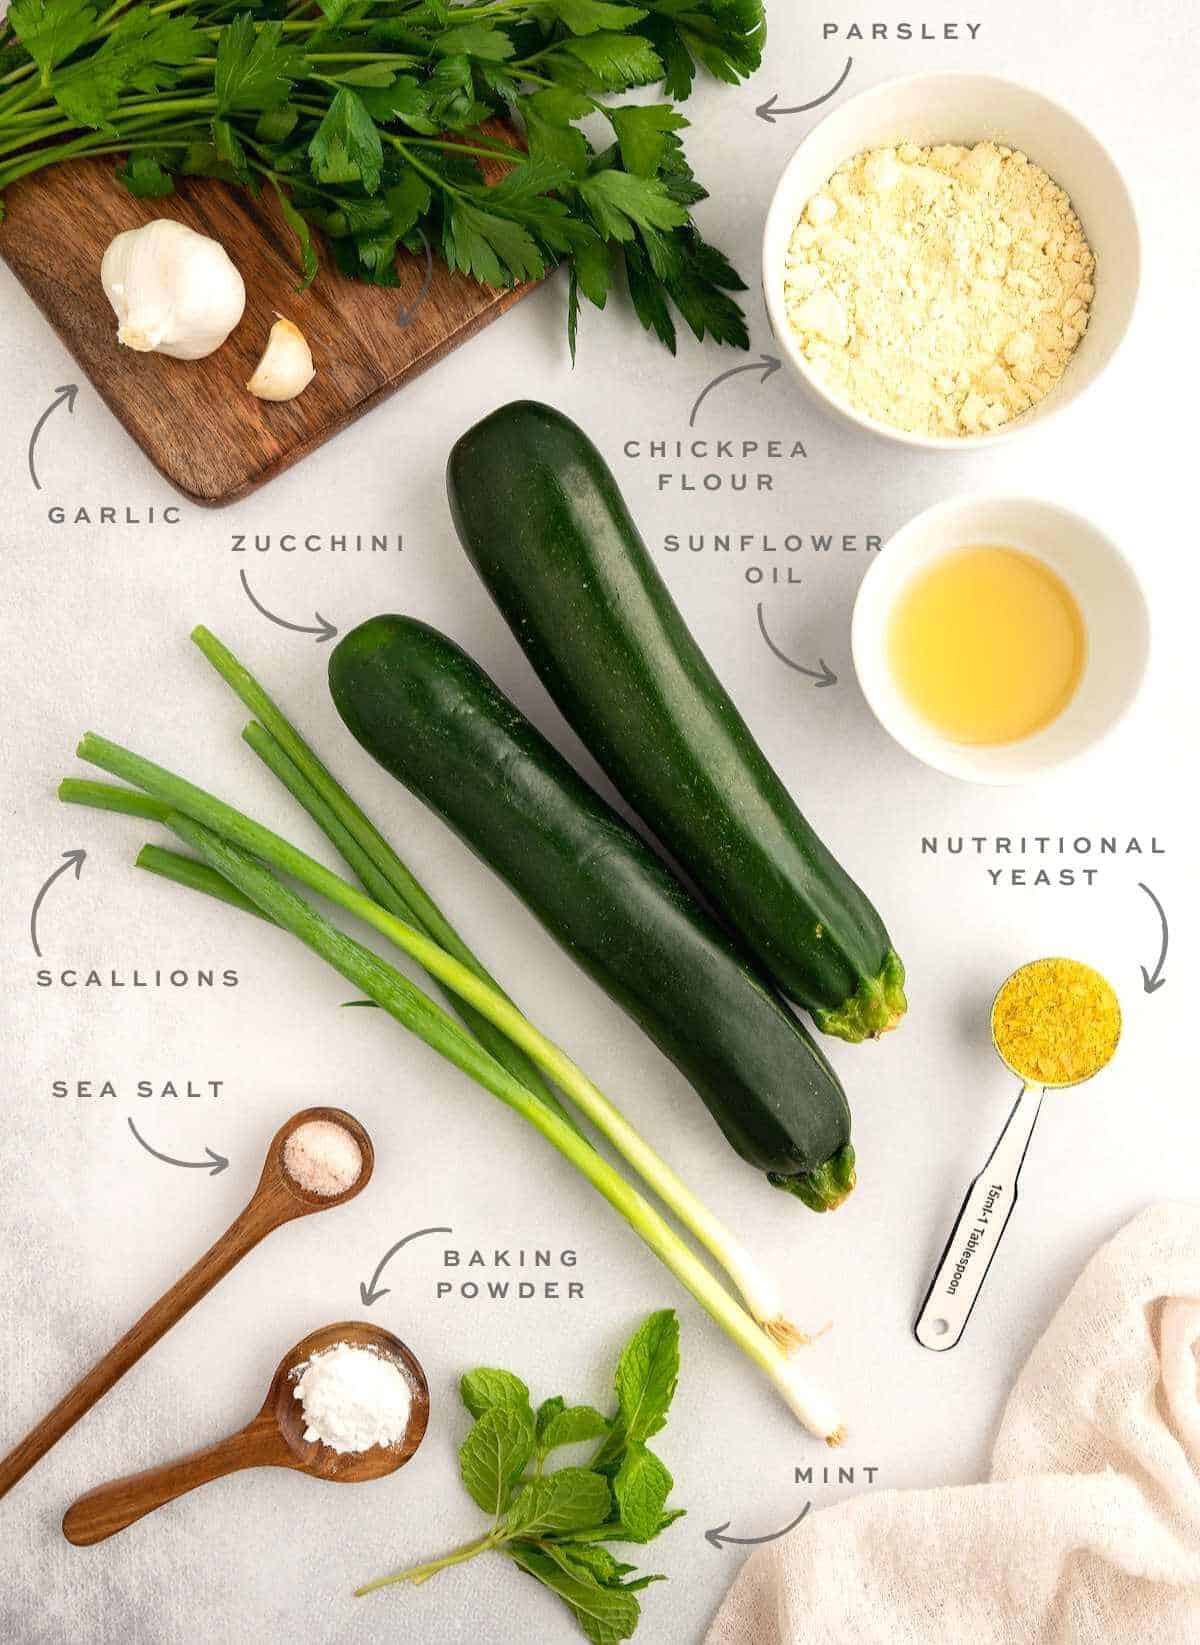 Ingredients for vegan zucchini measured and labelled.